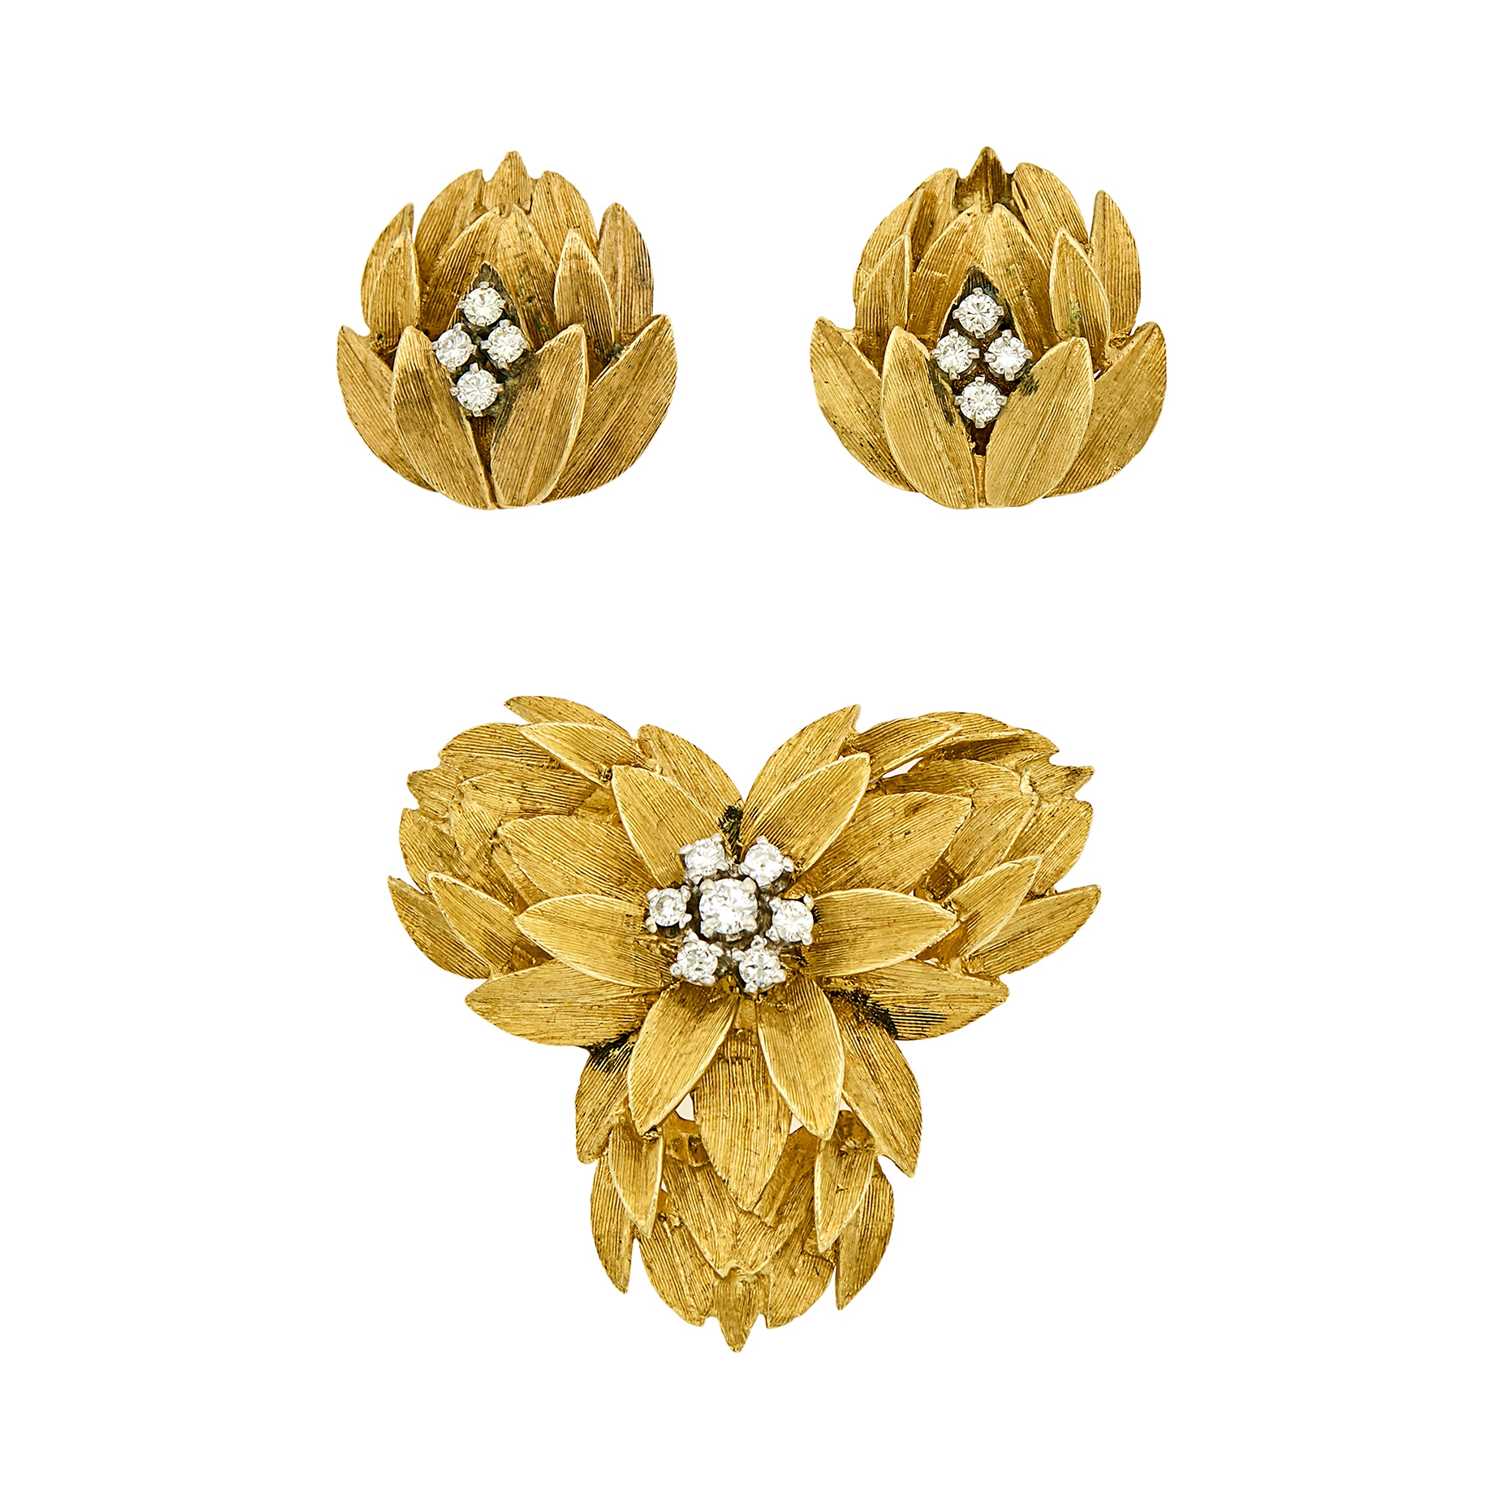 Lot 1103 - Gold and Diamond Flower Brooch and Pair of Earrings